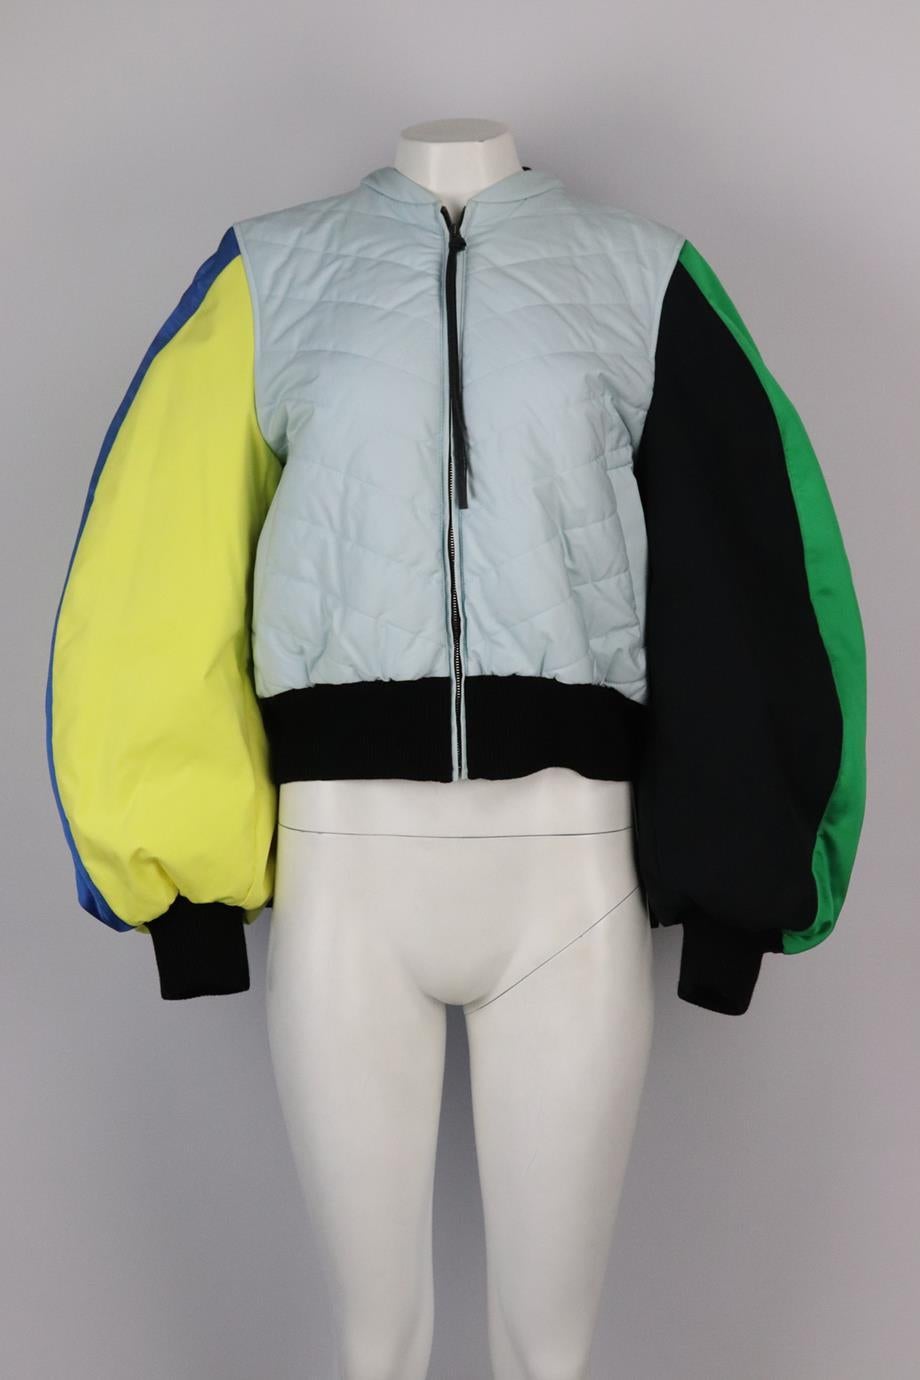 Loewe colour block quilted cotton blend bomber jacket. Multicoloured. Long sleeve, crewneck. Zip fastening at front. 100% Cotton; fabric2: 100% viscose; fabric3: 100% leather; ribbing: 89% wool, 10% polyamide, 1% elastane; lining: 100% cotton. Size: